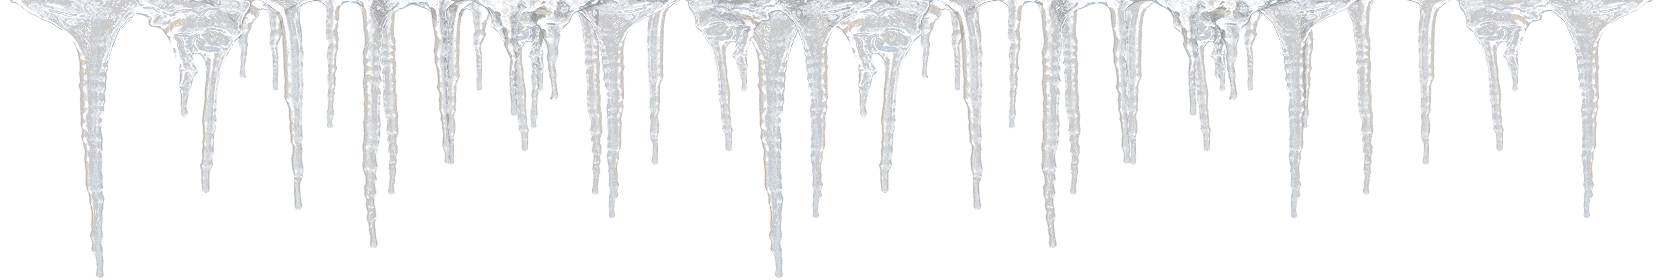 Icicles Png Image   Icicle Png - Icicle, Transparent background PNG HD thumbnail